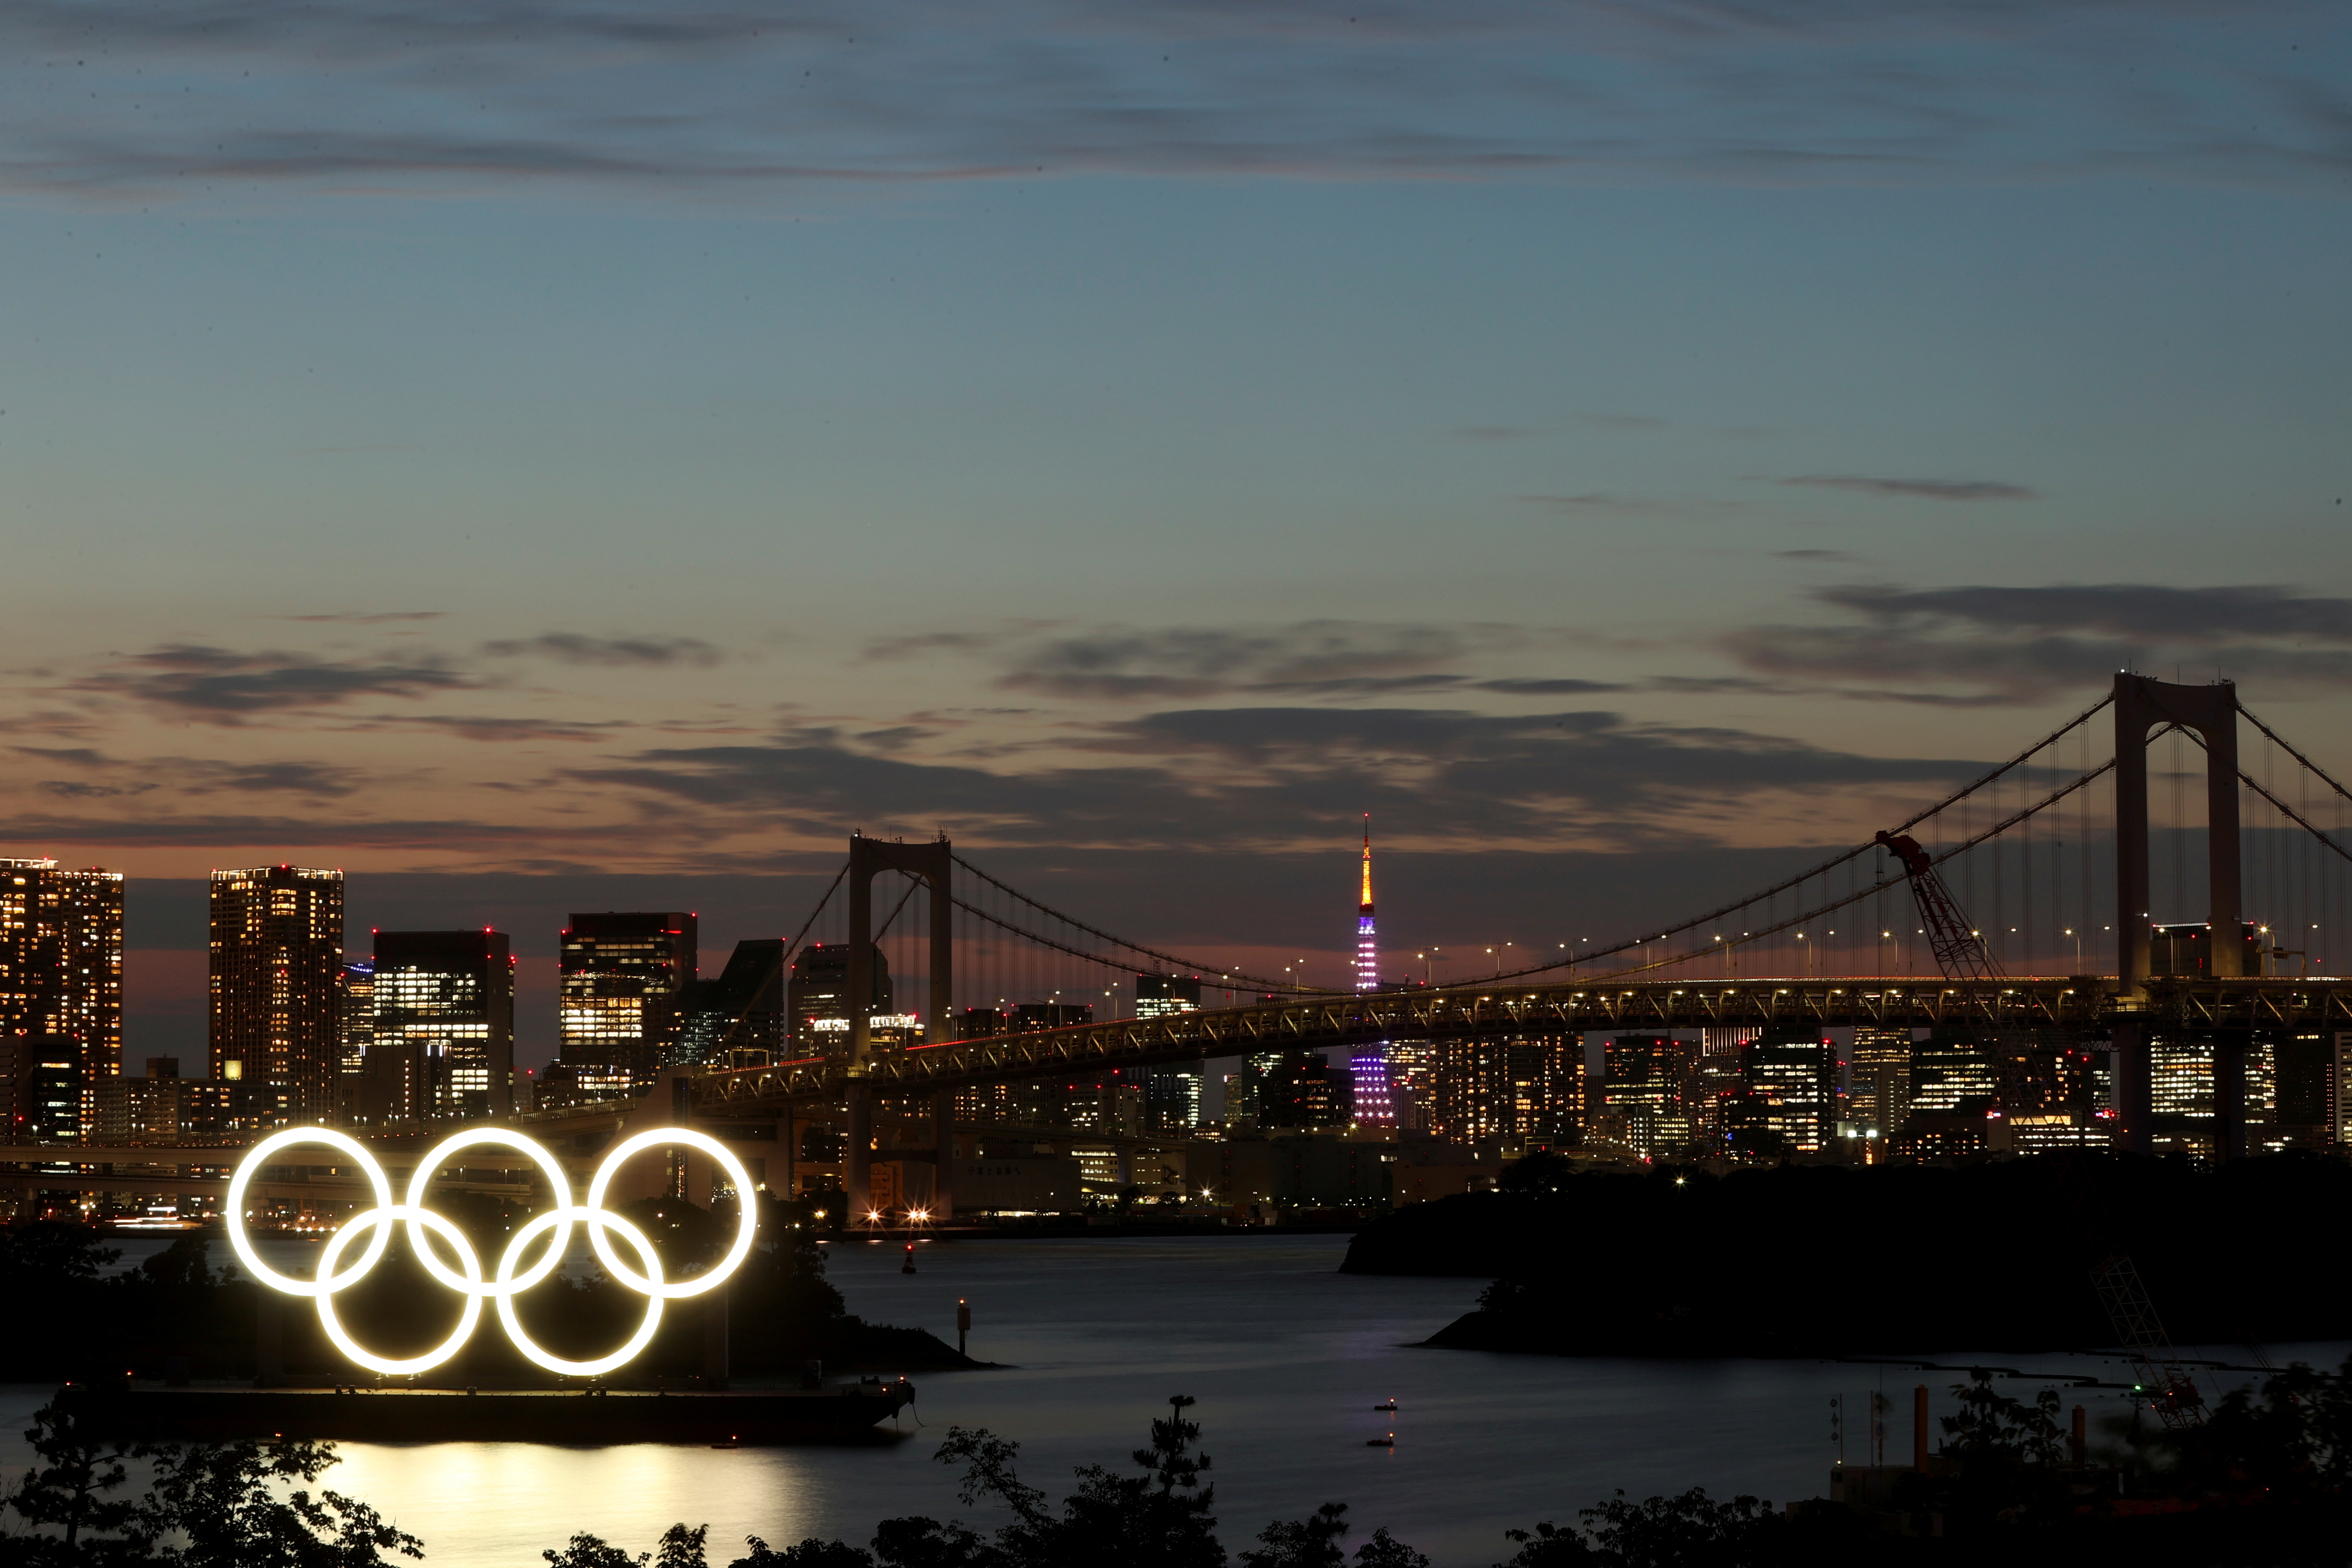 A general view of the Olympic Rings installed on a floating platform with the Rainbow Bridge in the background in preparation for the Tokyo 2020 Olympic Games in Tokyo